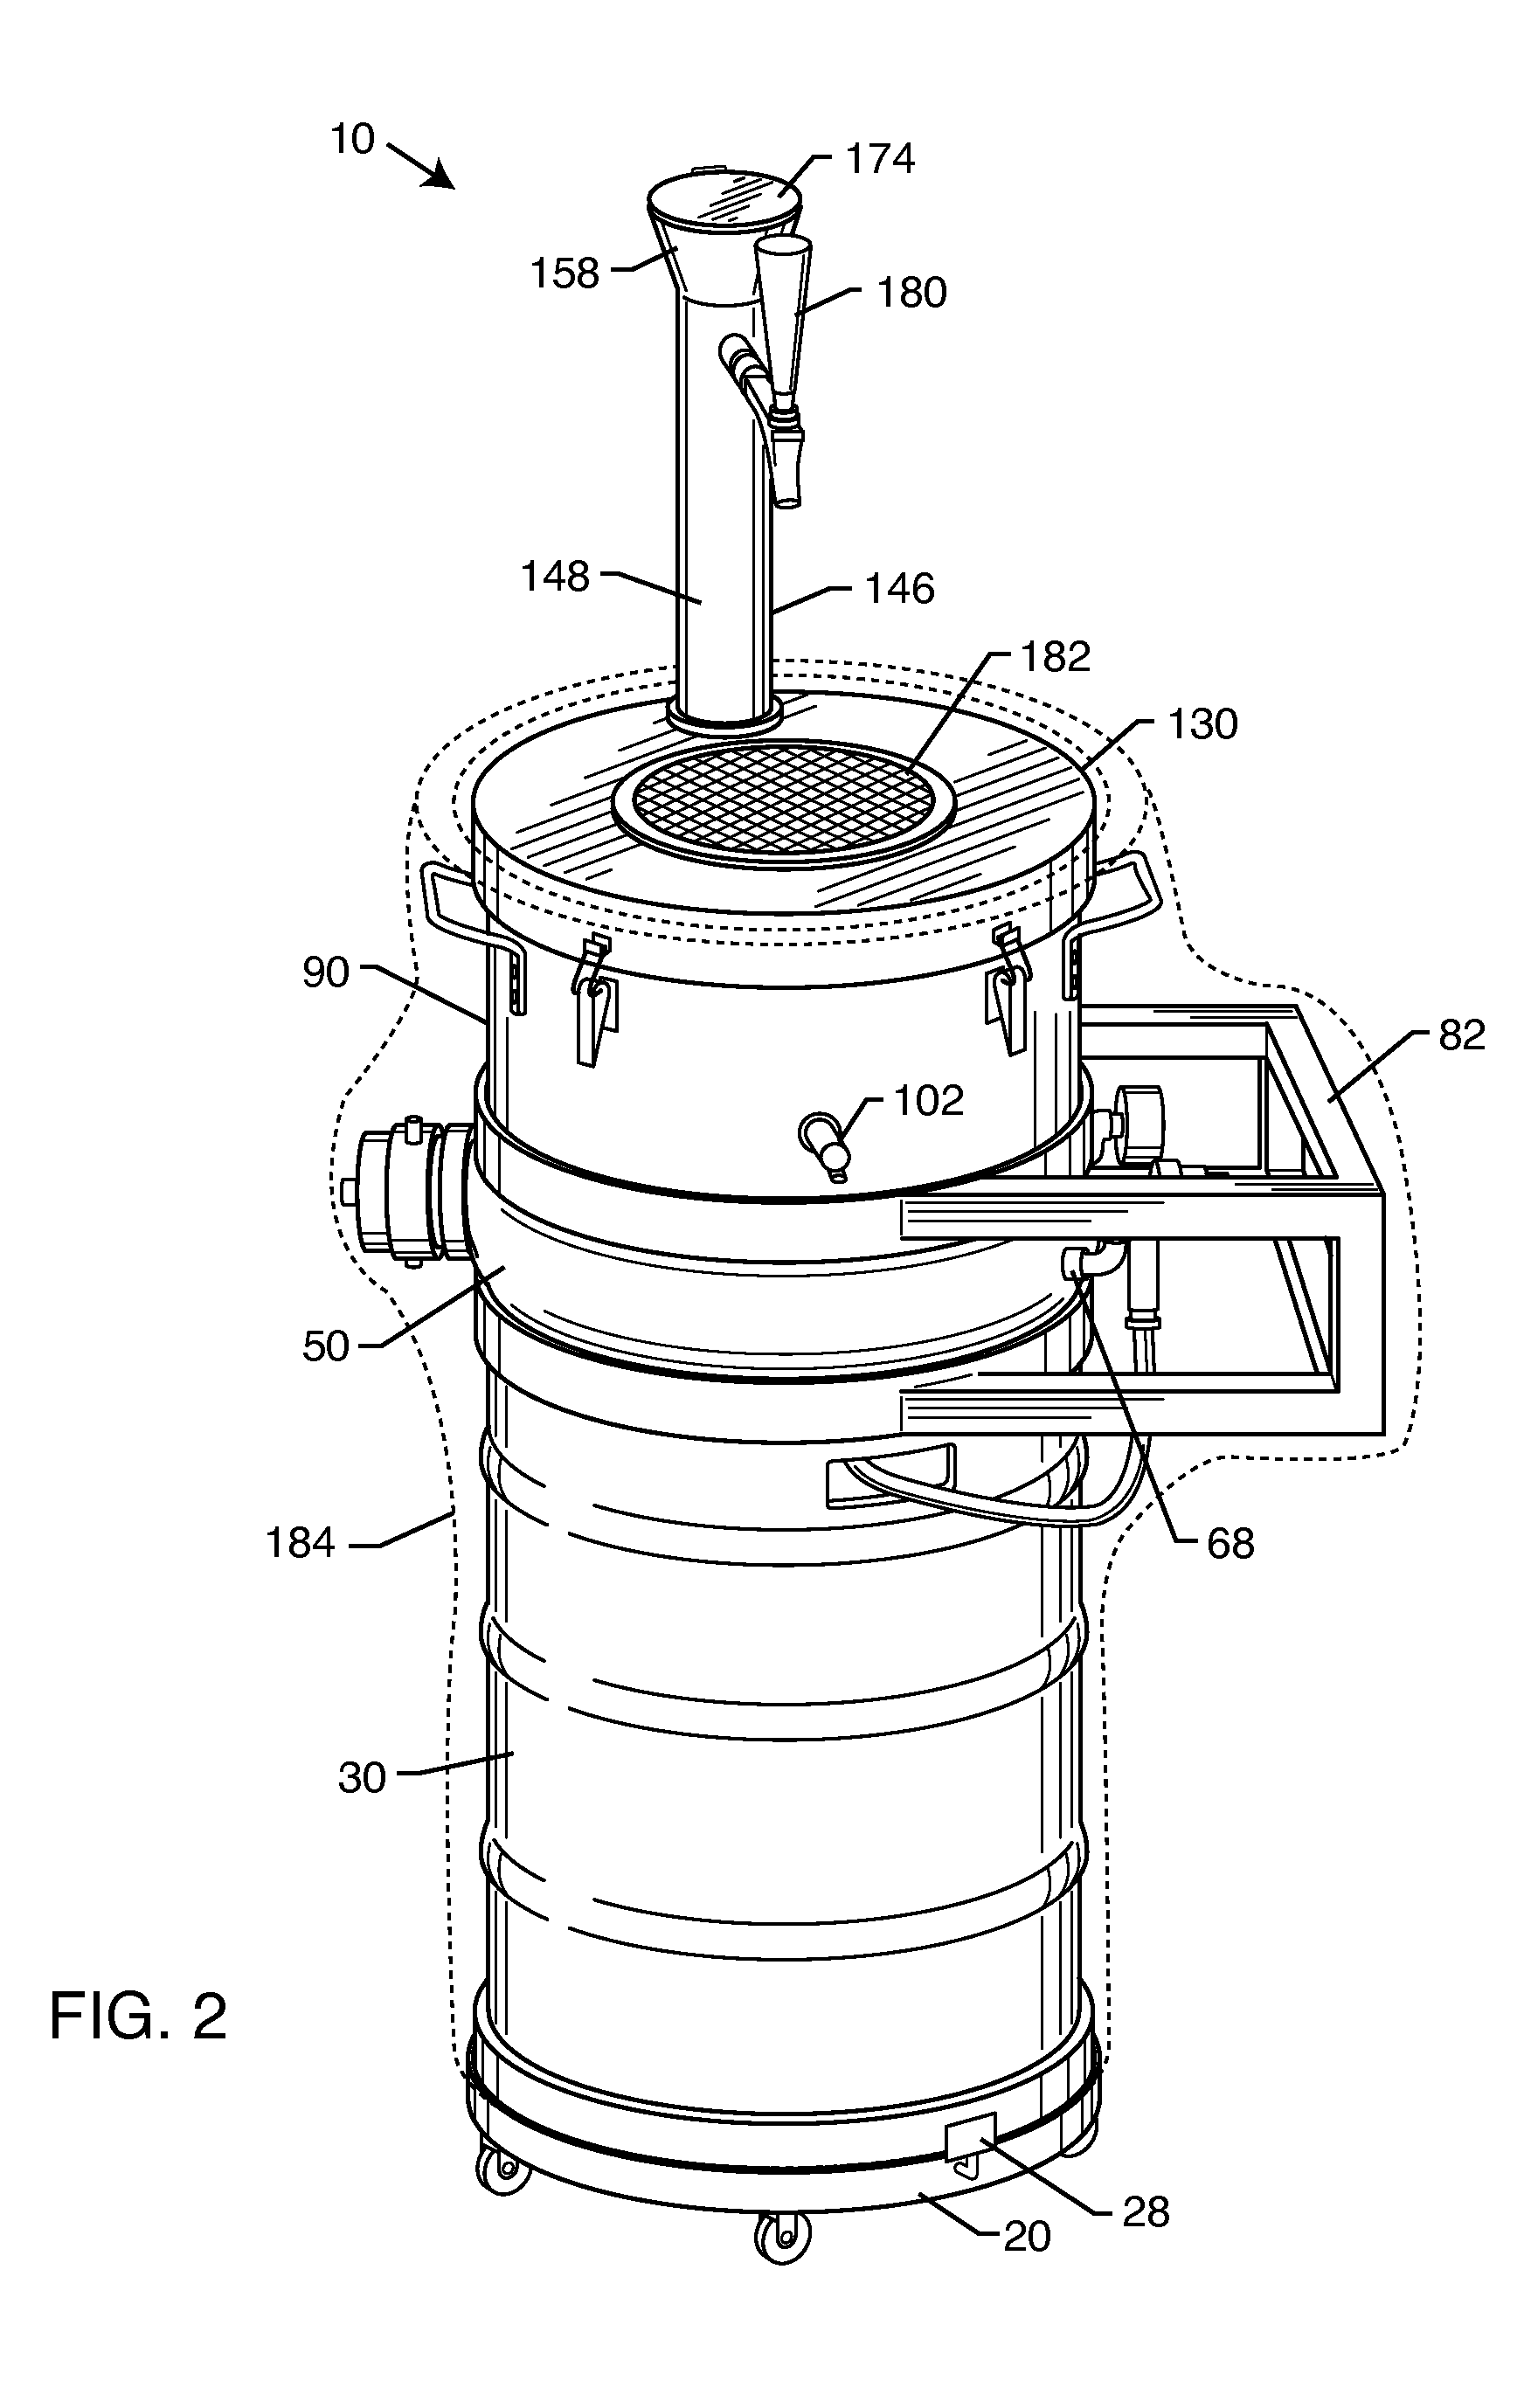 Cooling, carbonation and dispensing system for a liquid in a keg